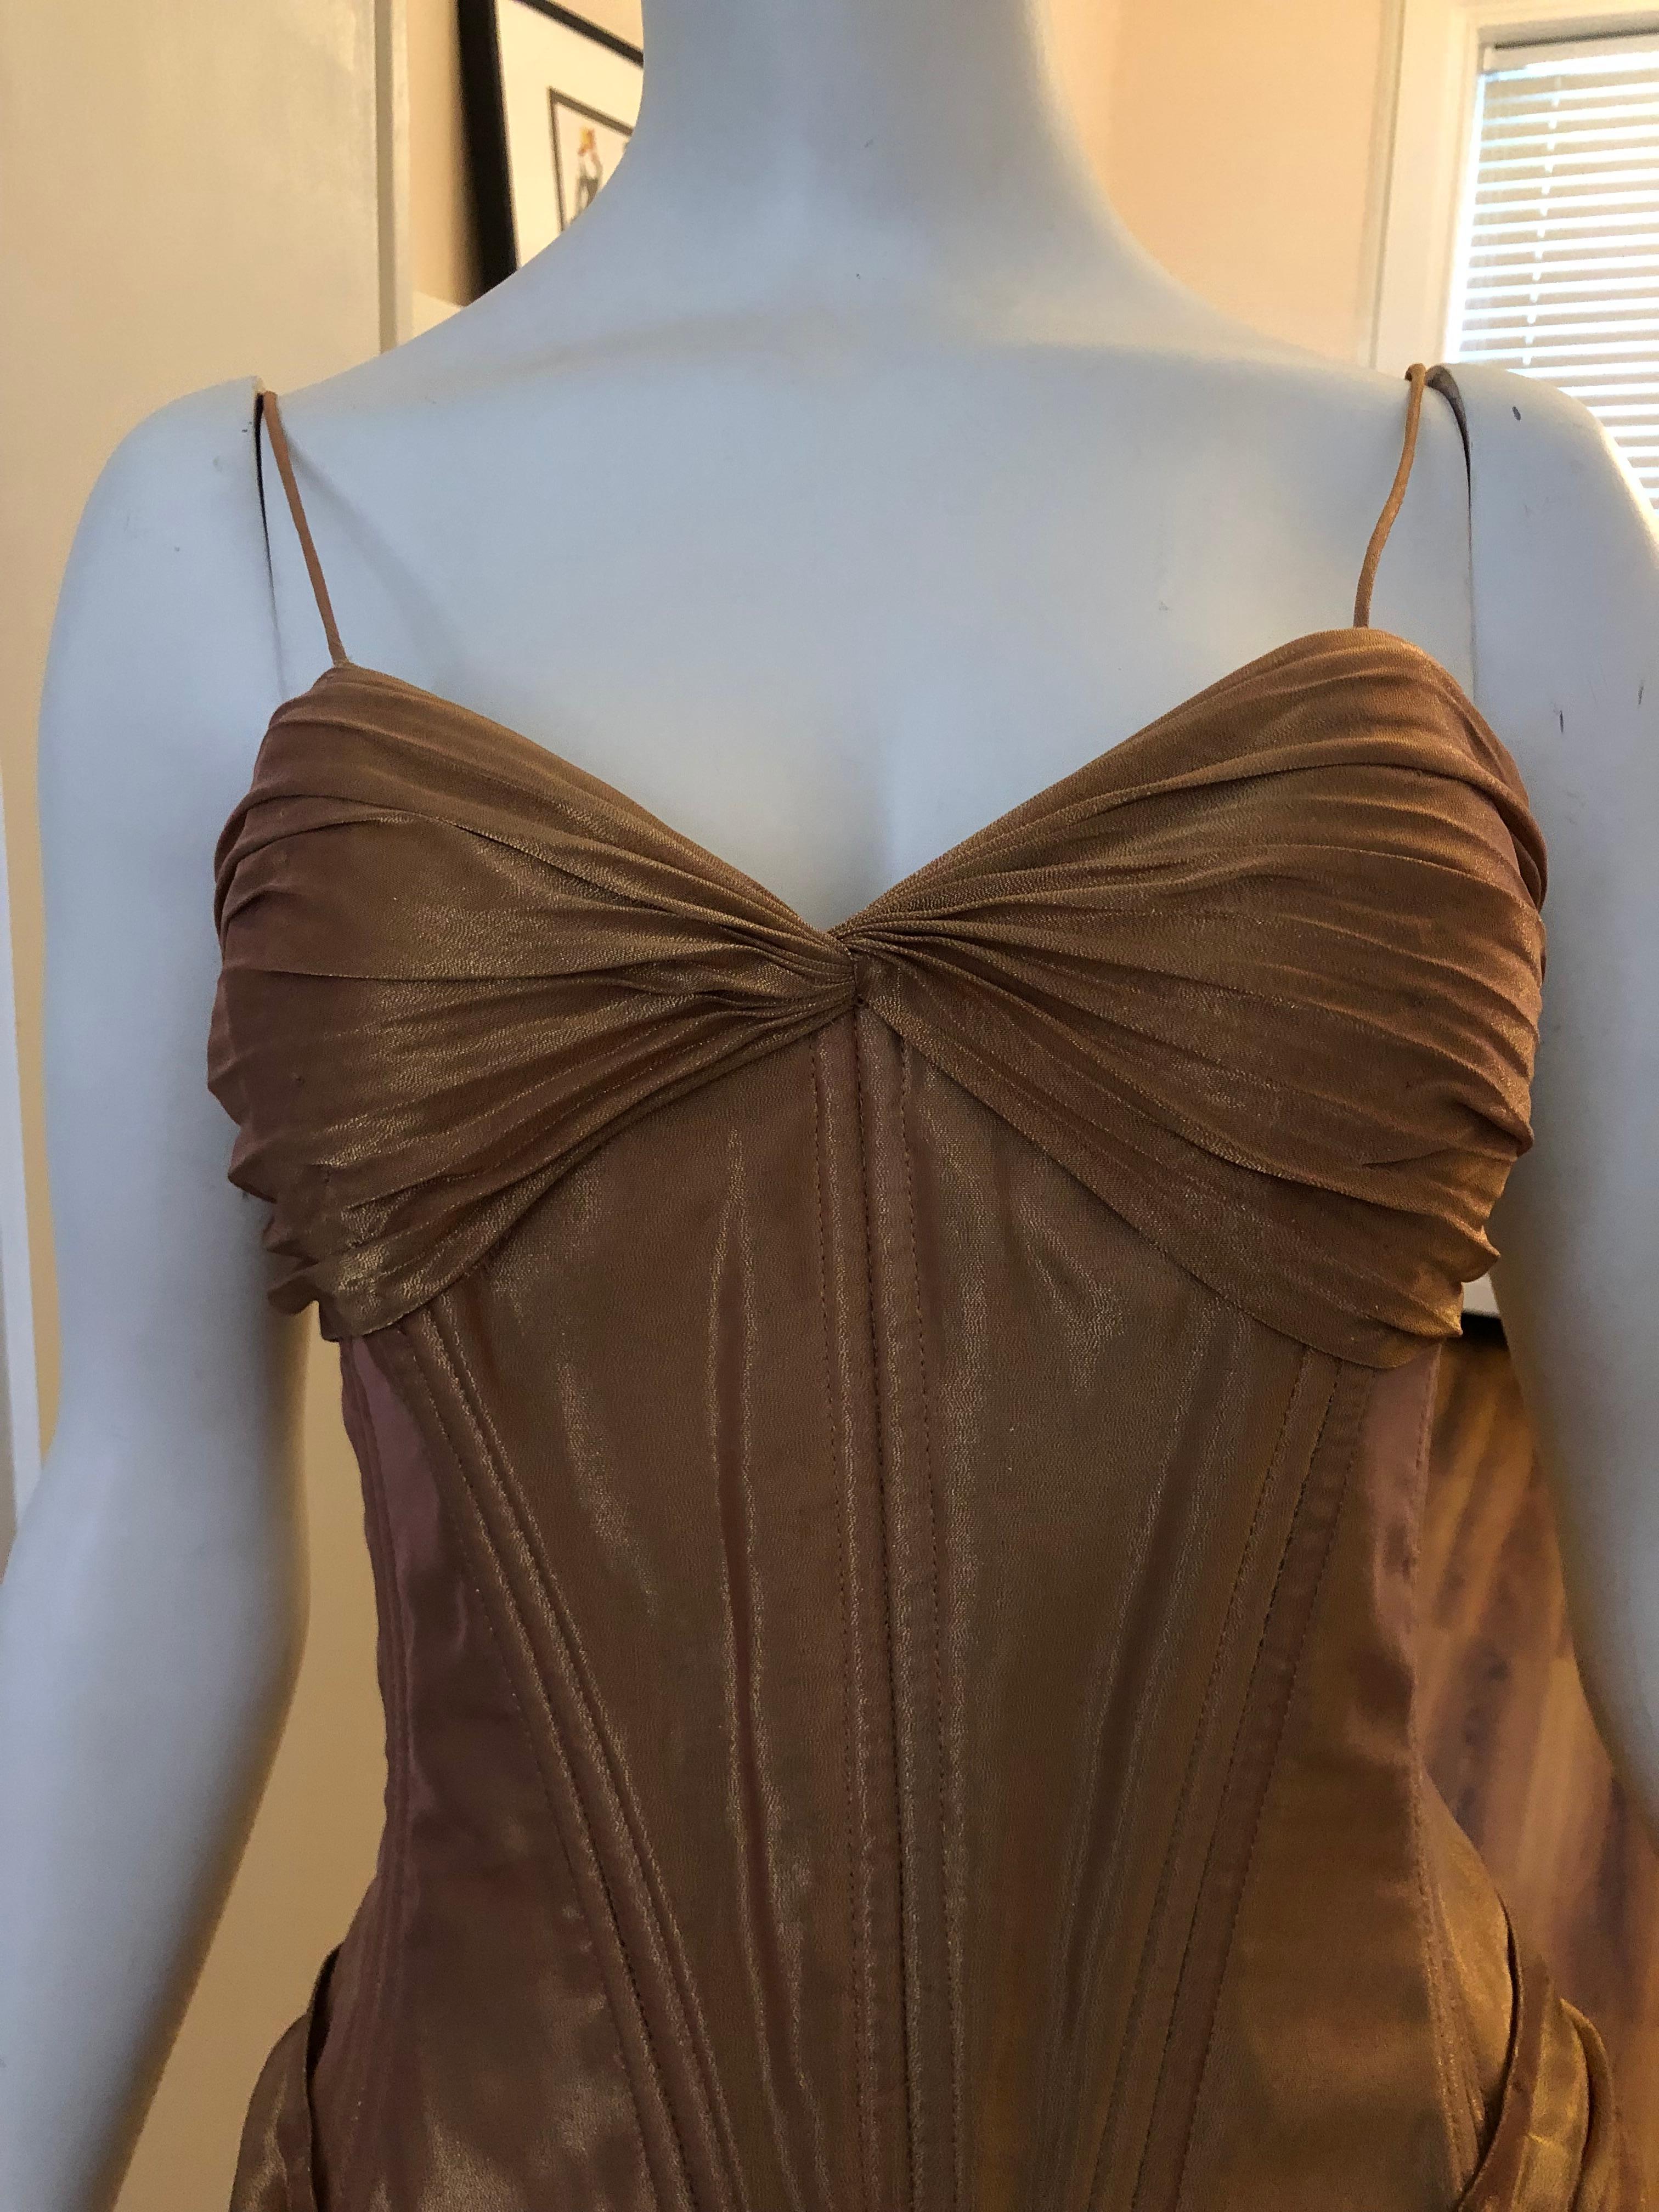 Outstanding piece in excellent condition. The dress is boned to the waist and has a an inset bra. The permanent pleats of the skirt complement the gathers to be found at the bust and waist. The bolero has gathered pleats at the collar and short